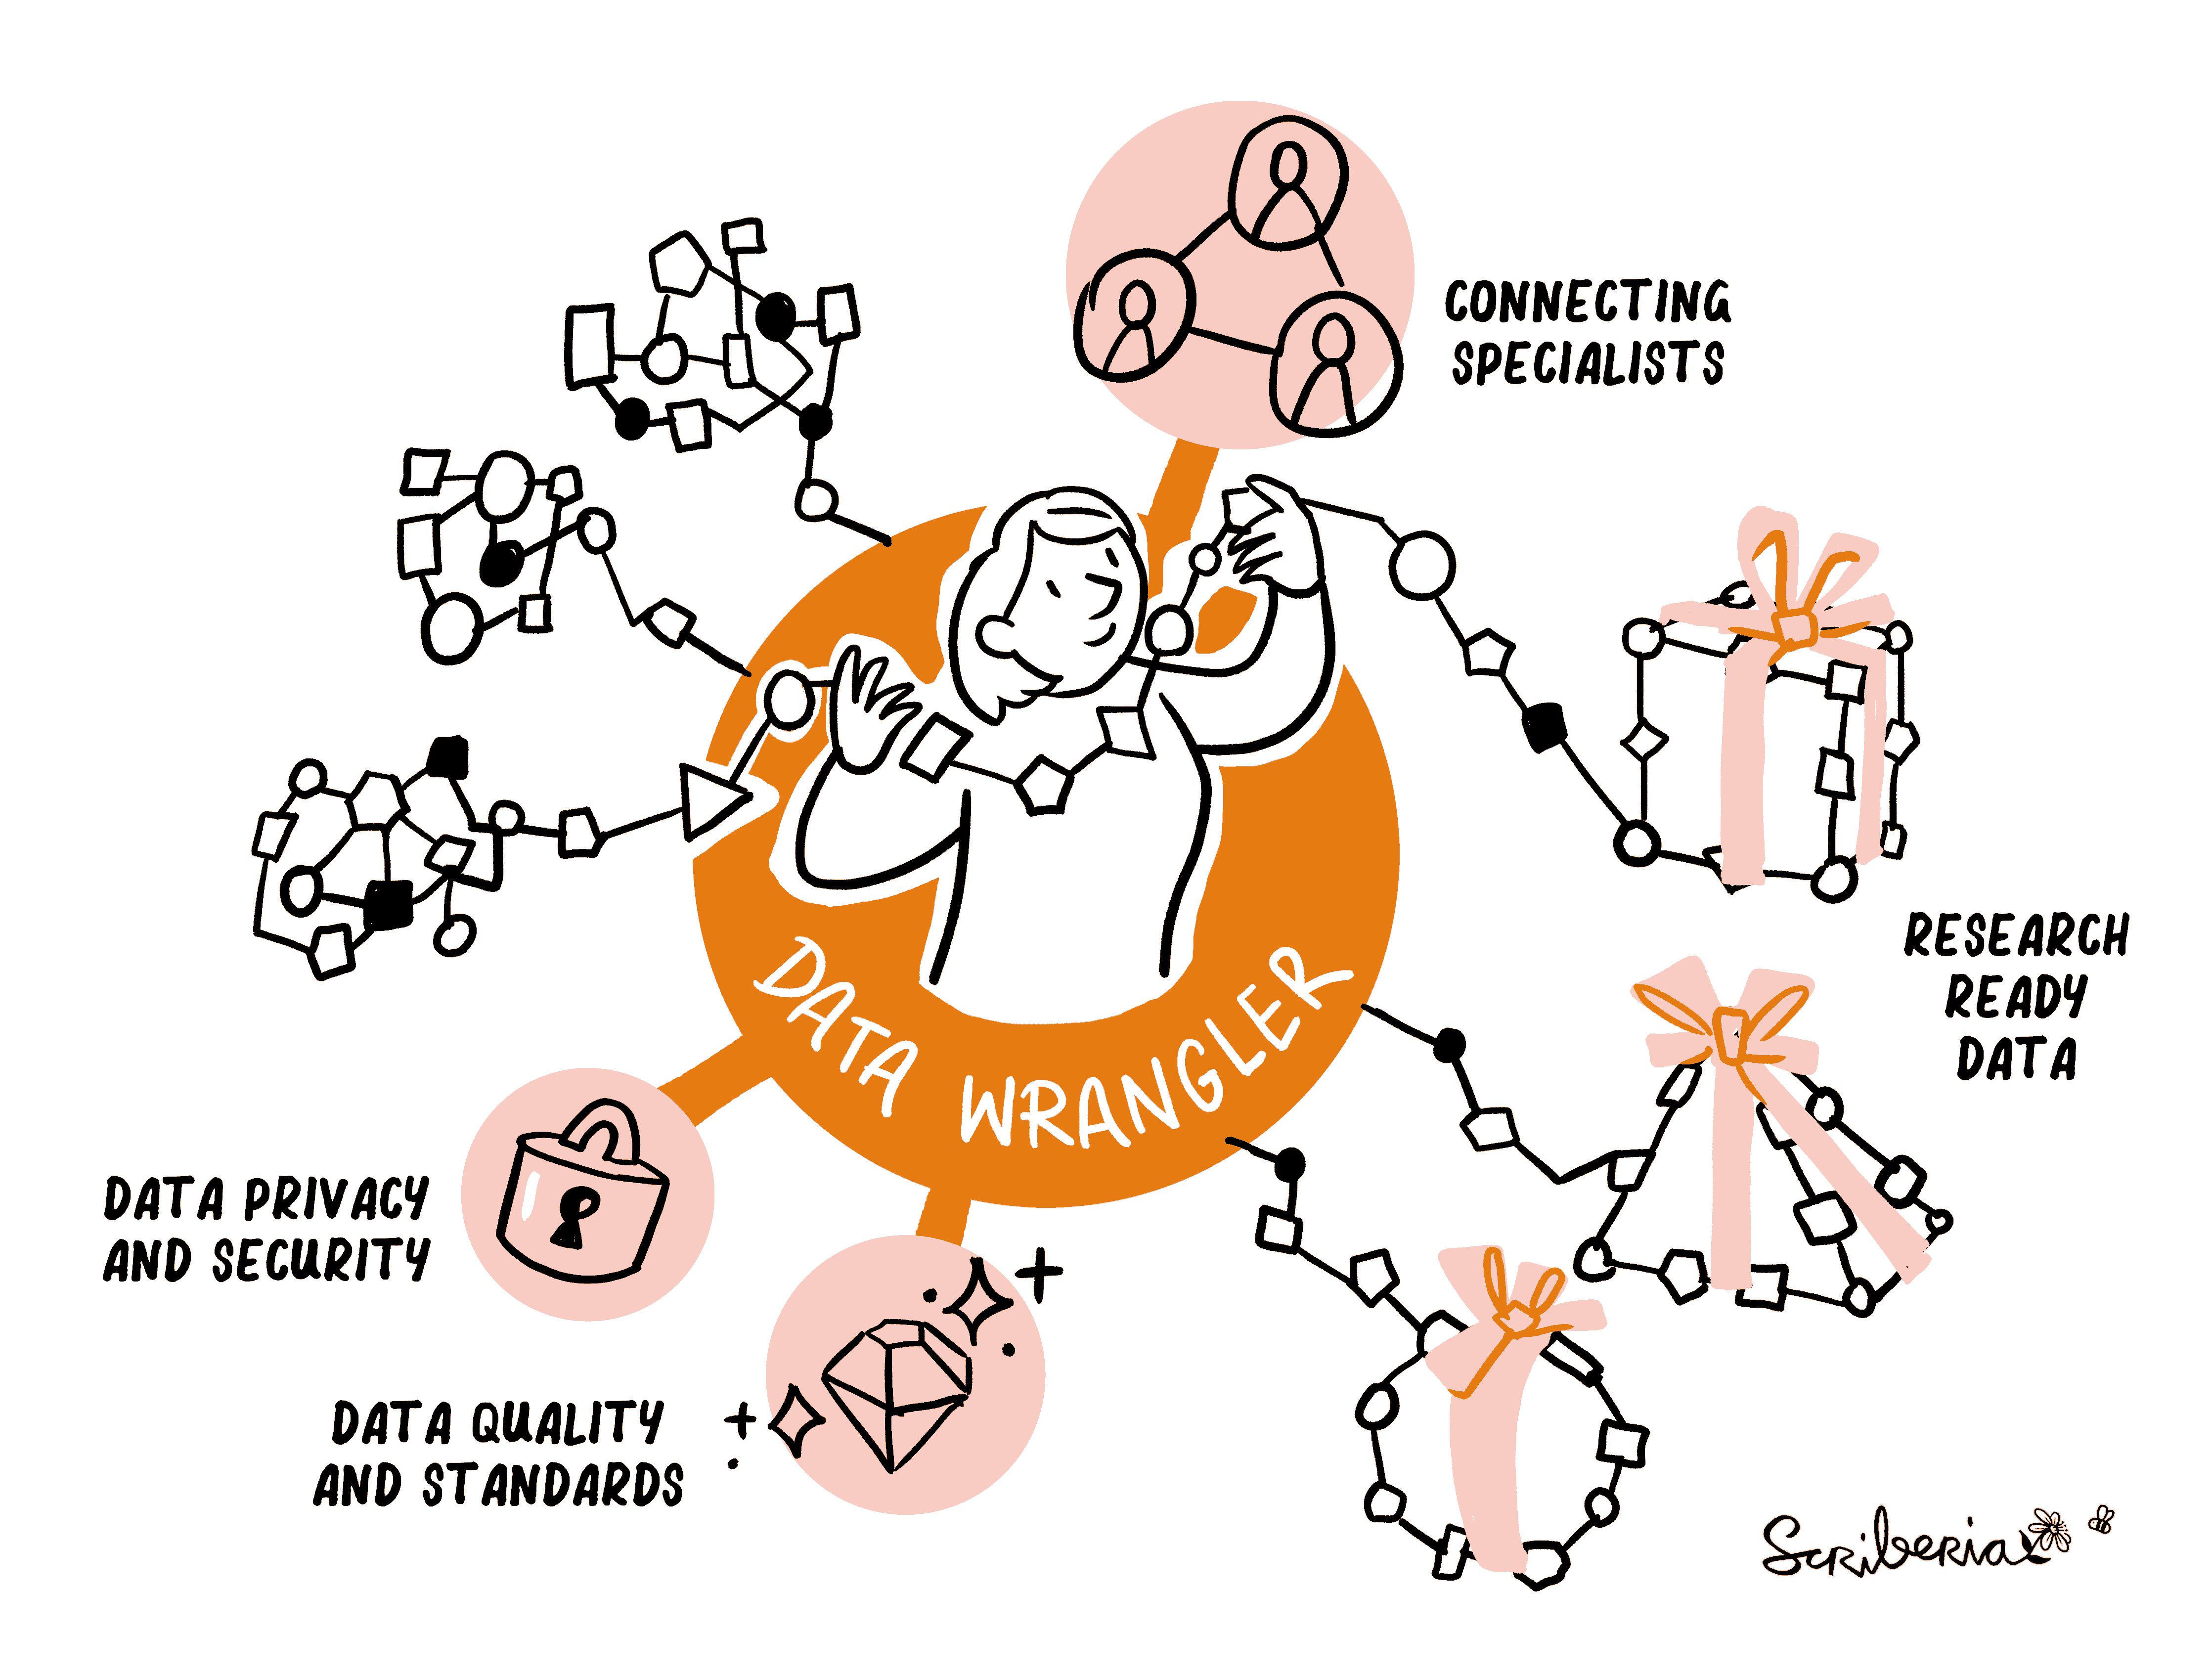 Hand-drawn illustration by Scriberia. A person representing a Data Wrangler is in a central bubble, on their left there are links to three clusters of connected shapes representing unstructured data. The Data Wrangler ‘unravels’ these clusters and re-structures them to form three distinct presents, labelled ‘Research Ready Data’, shown to the right of the central bubble. Attached to the central bubble there are smaller individual bubbles labelled ‘Connecting Specialists' (shown by a triangle of linked people), 'Data Privacy and Security’ (padlock) and 'Data Quality and Standards (sparkling diamond).